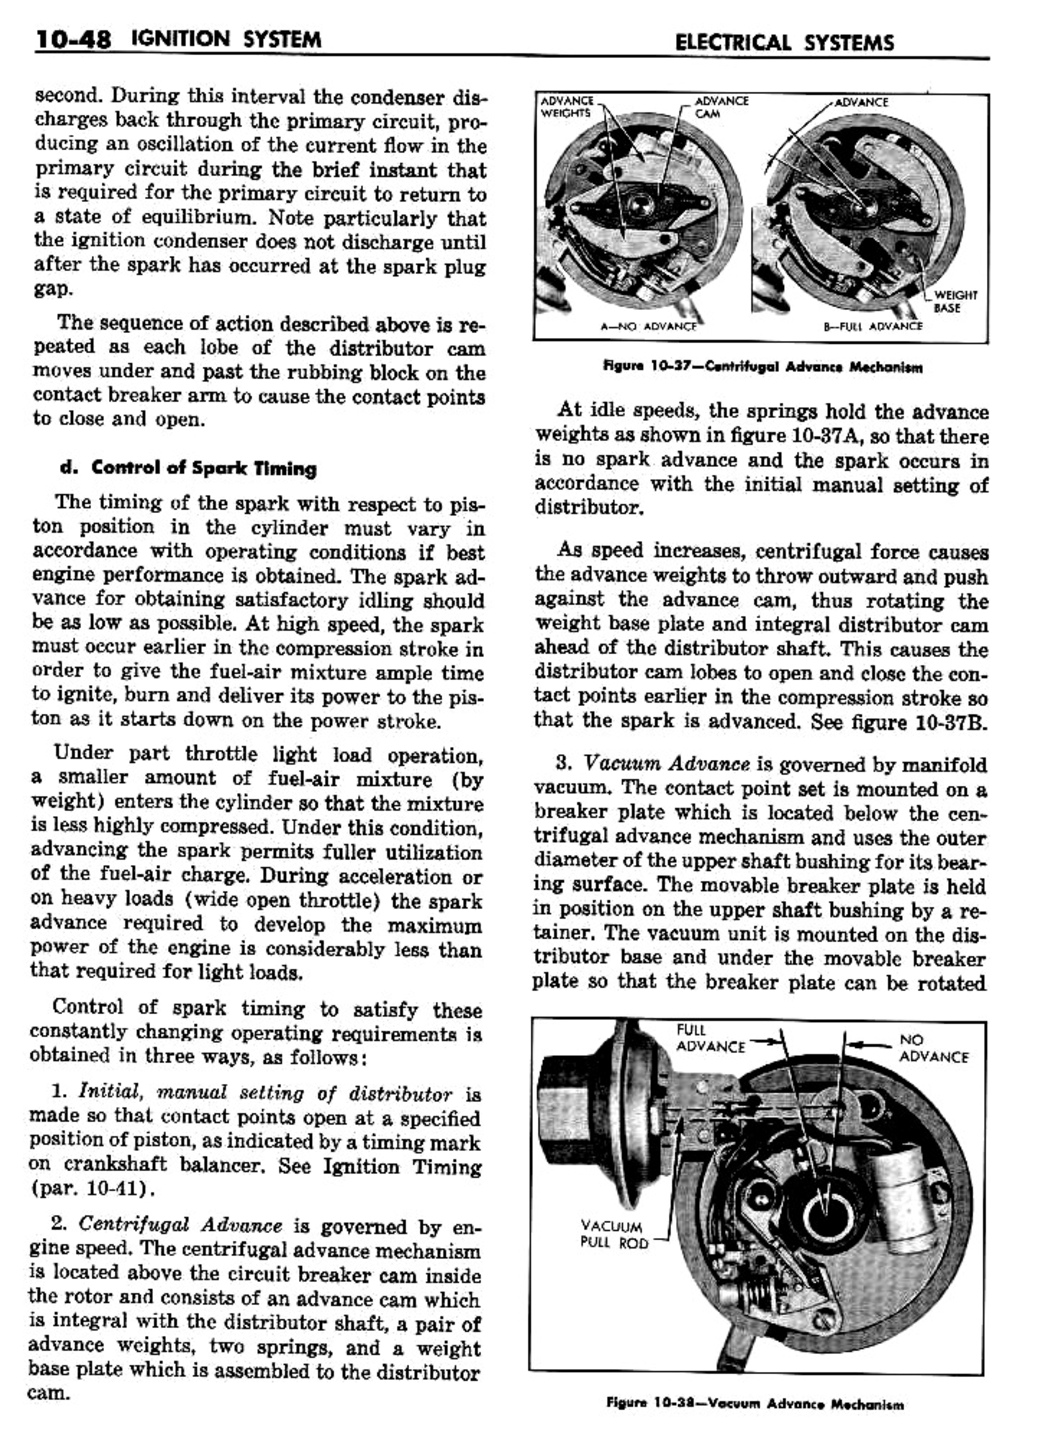 n_11 1957 Buick Shop Manual - Electrical Systems-048-048.jpg